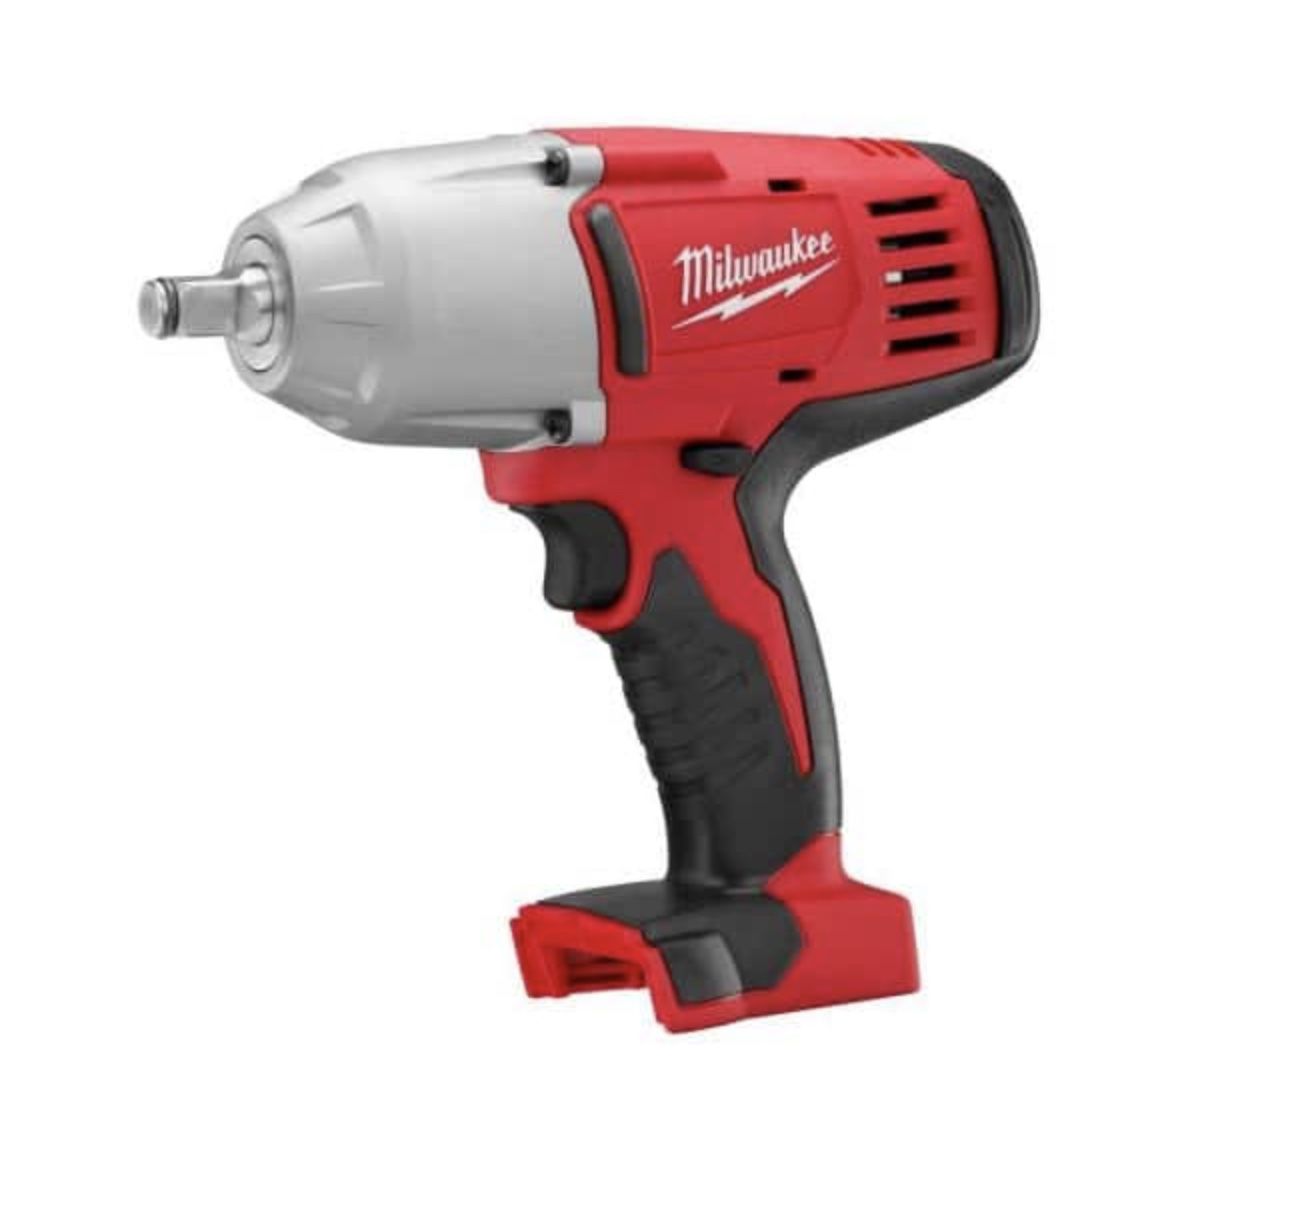 Brand New Milwaukee M18 Impact Wrench, Tool Only